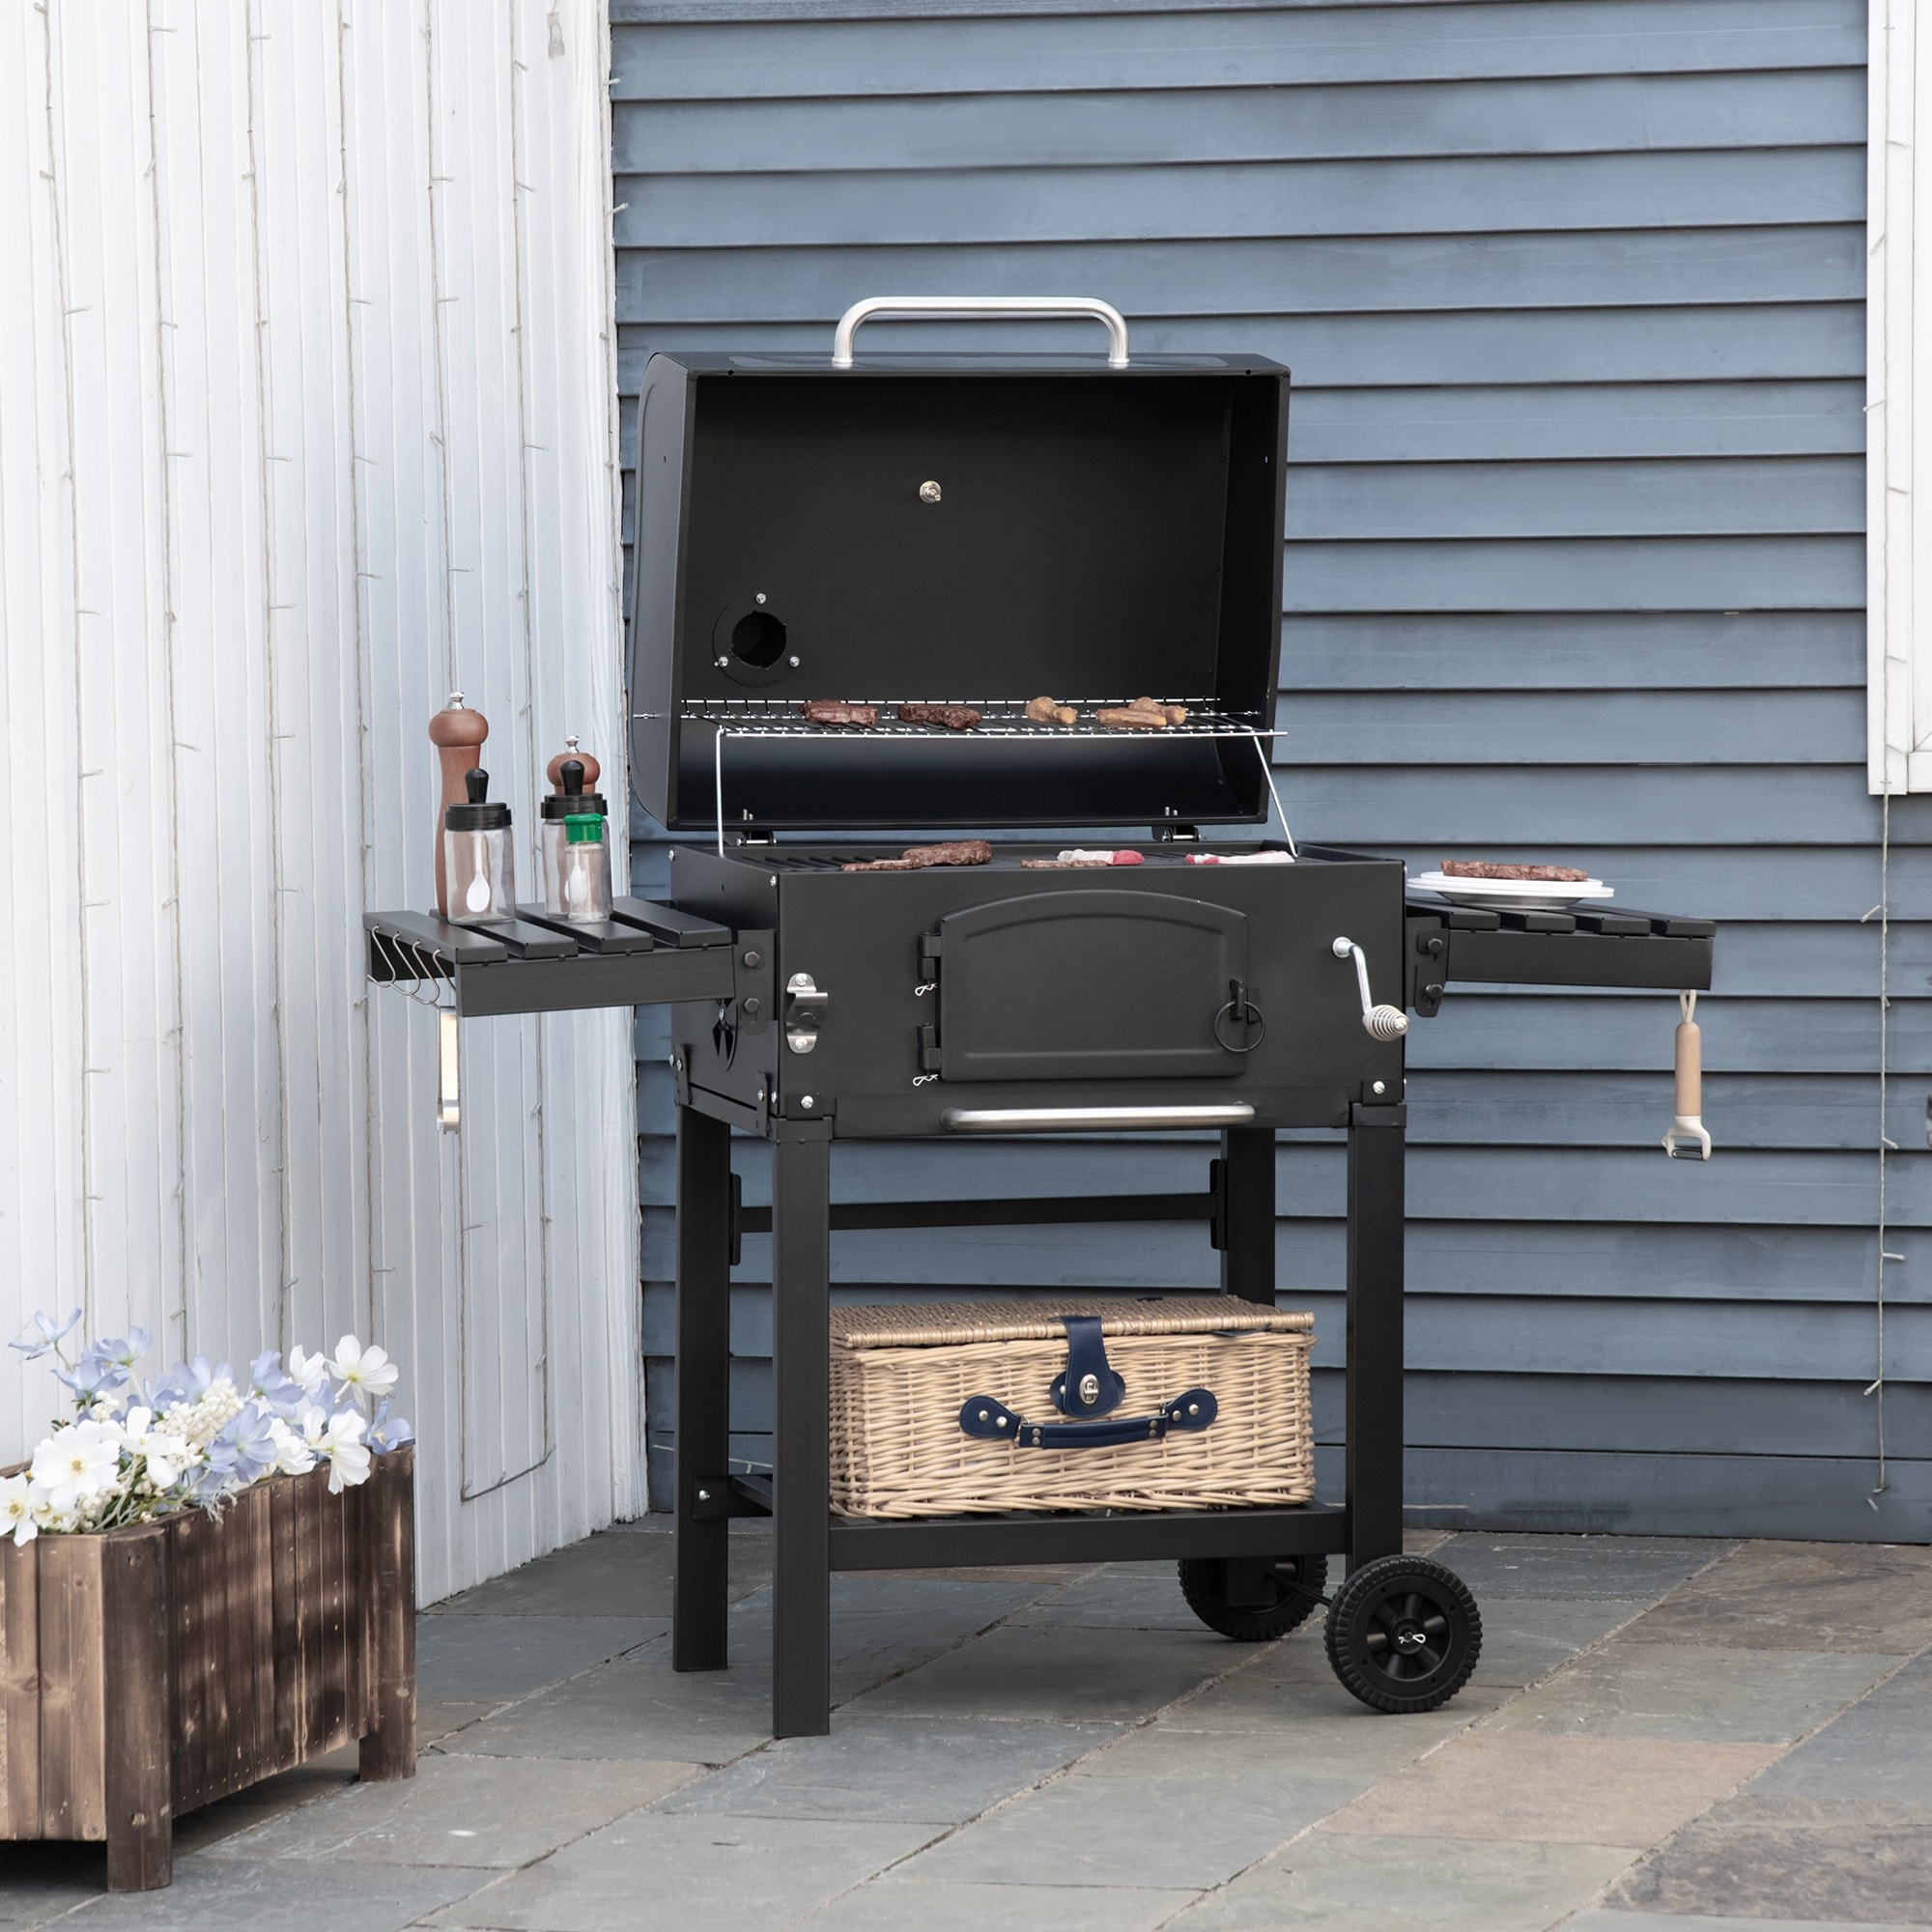 https://ak1.ostkcdn.com/images/products/is/images/direct/94430e5e720c3eb90b0ed3df108a92e492d22445/Outsunny-Charcoal-Grill-BBQ-with-Adjustable-Charcoal-Height%2C-Portable-Barbecue-Smoker-with-Folding-Shelves%2C-Thermometer.jpg